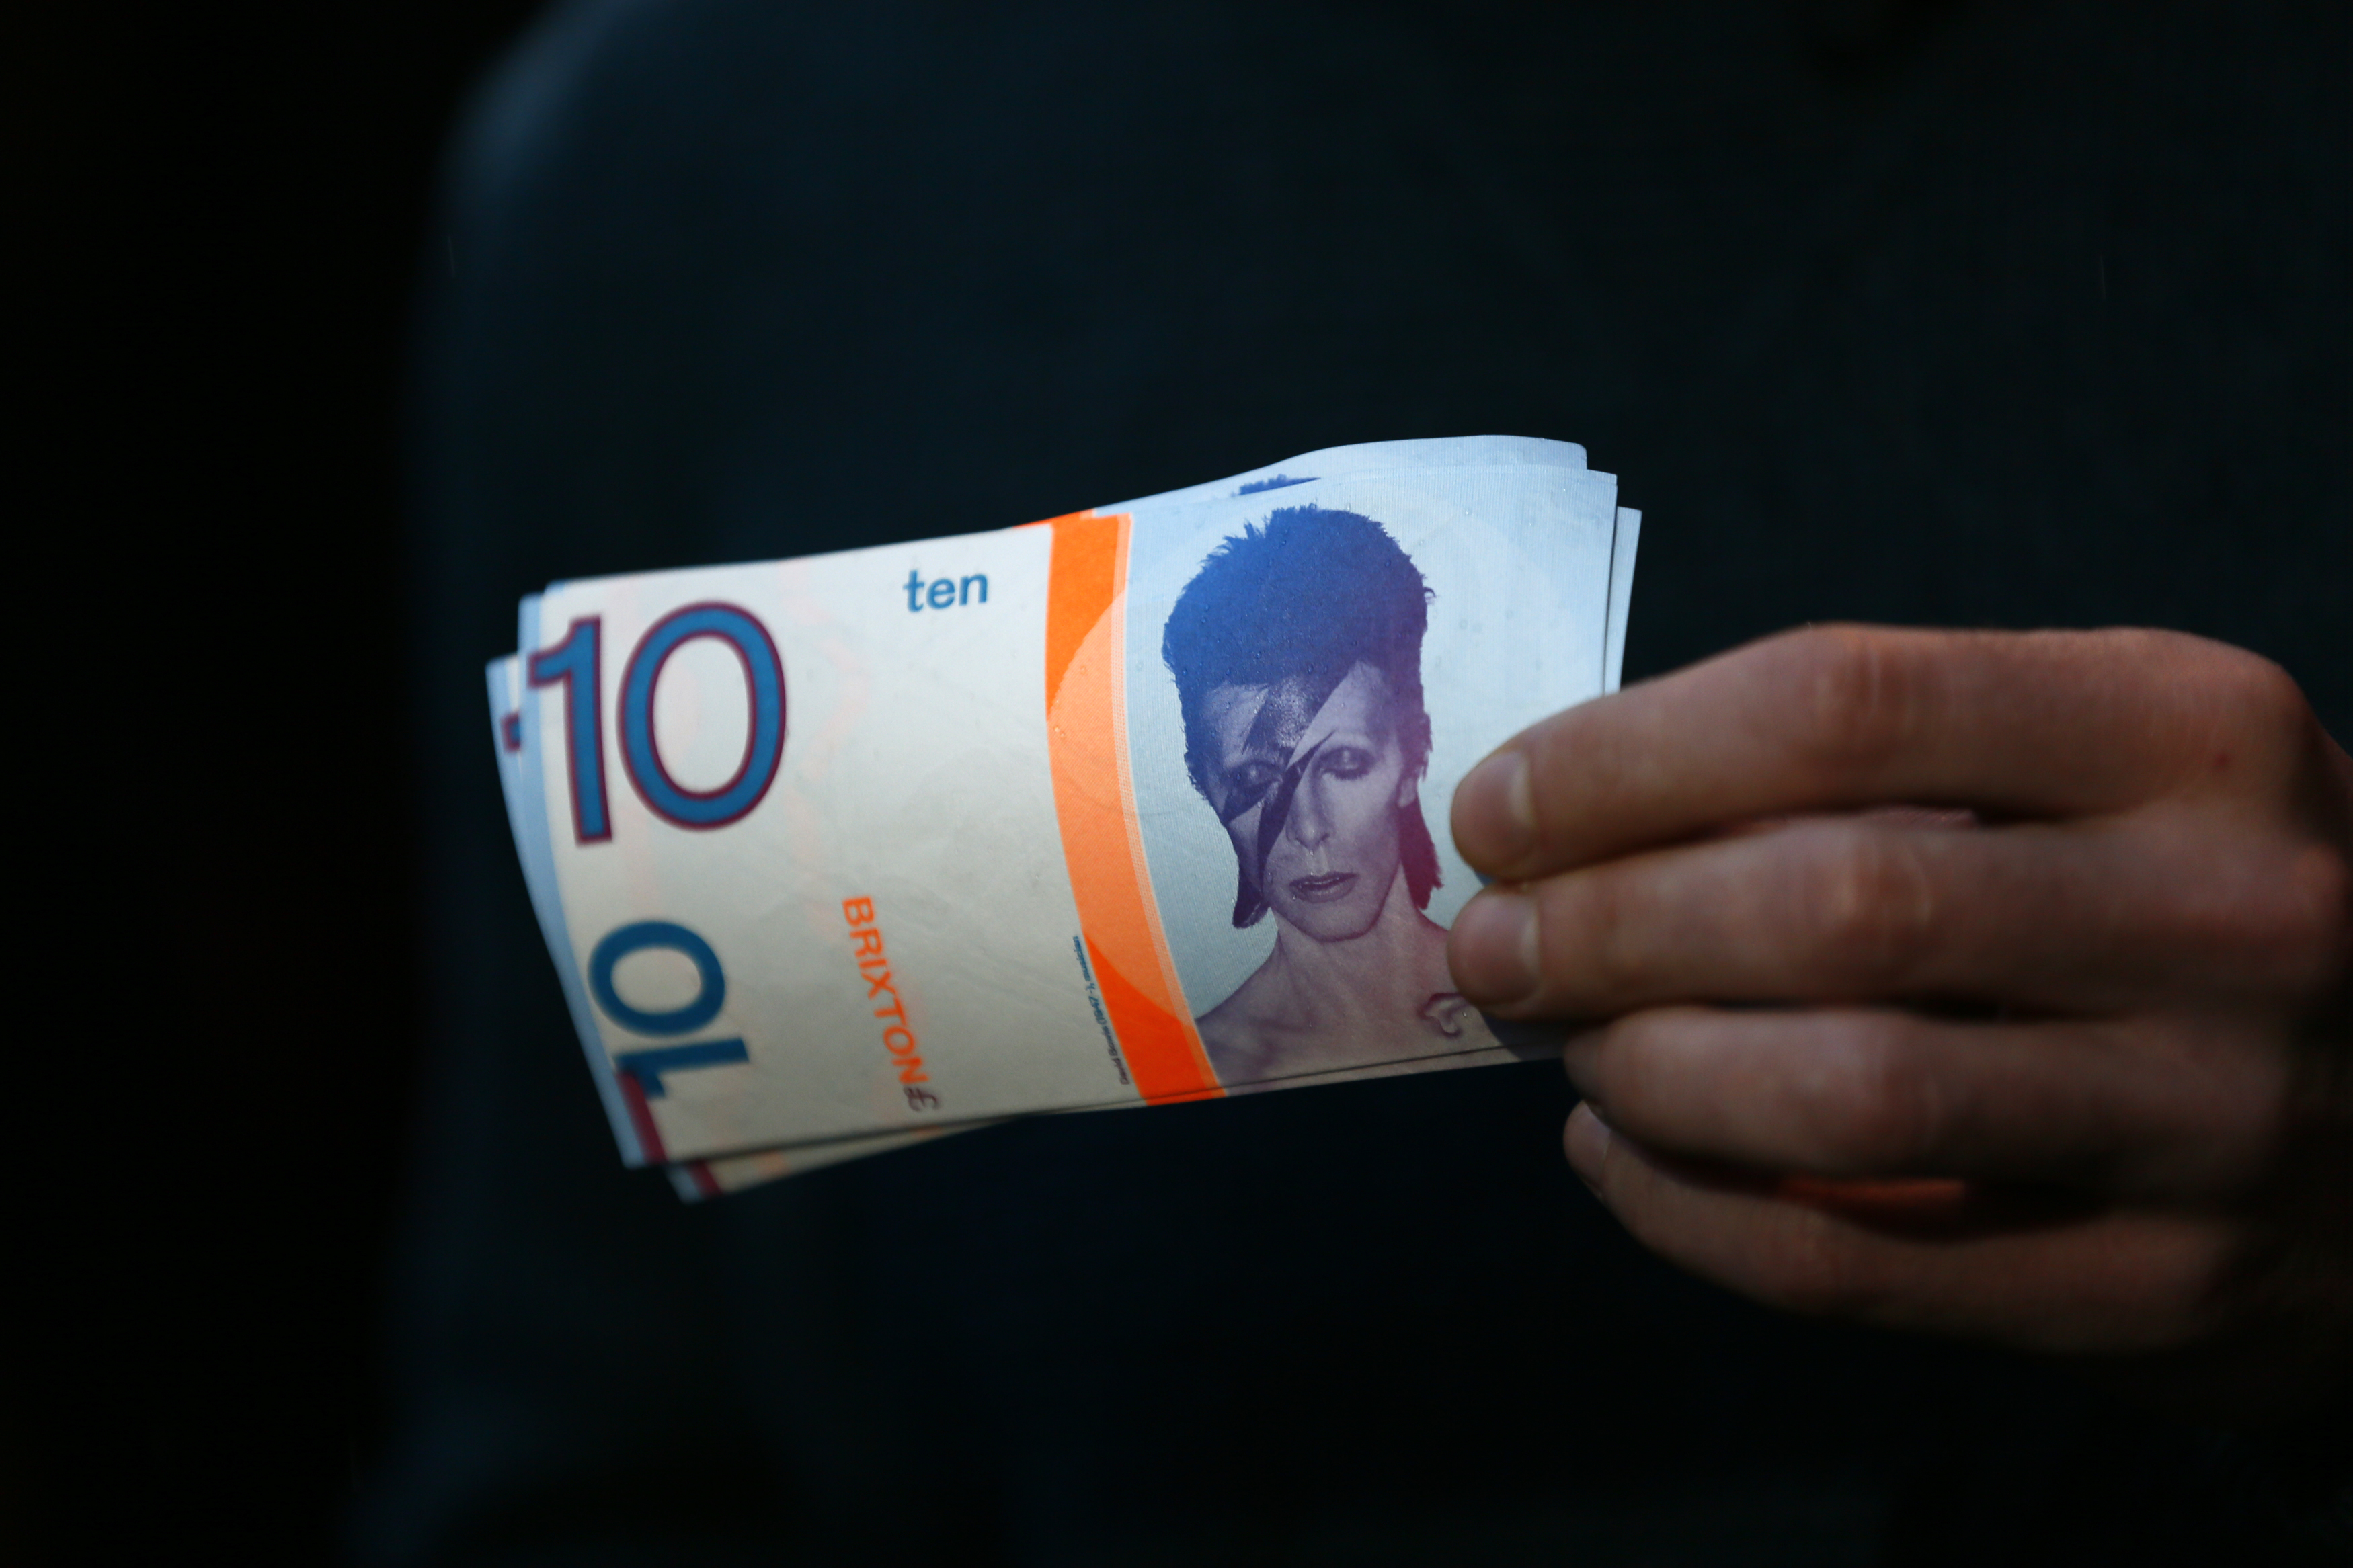 David Bowie appeared on the Brixton Pounds note.